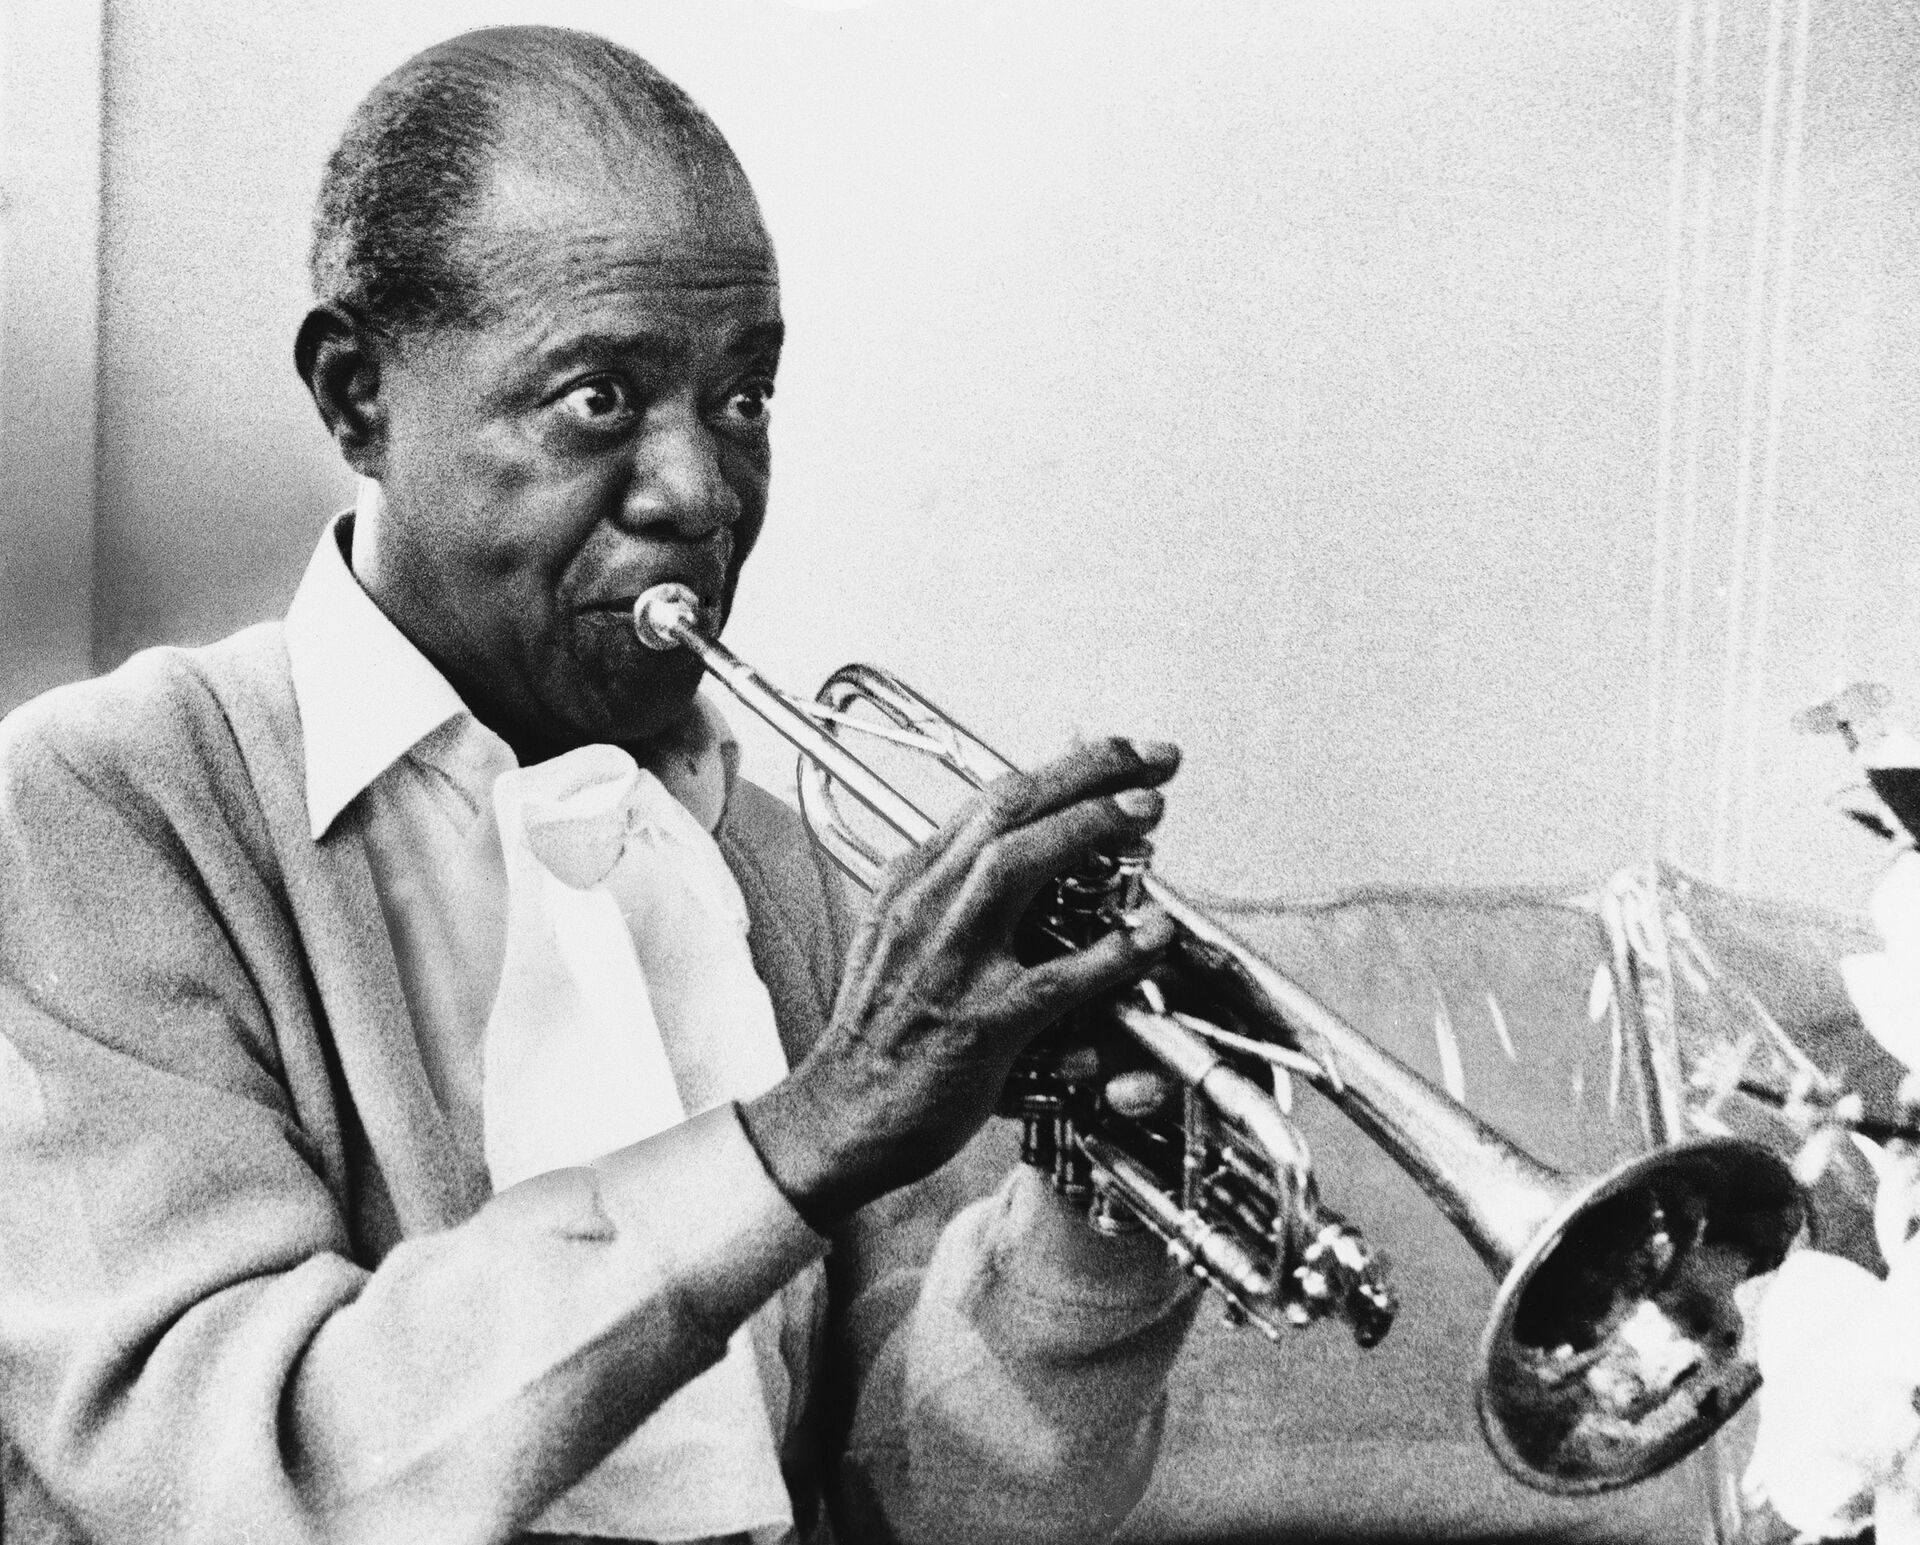  In a June 21, 1971 file photo jazz great Louis Armstrong practices with his horn at his Corona, New York home on June 21, 1971. A live recording of Louis Armstrong playing his trumpet for one of the last times is being played Friday April 27, 2012 at the National Press Club in Washington where it was created in January 1971. - Sputnik International, 1920, 07.09.2021